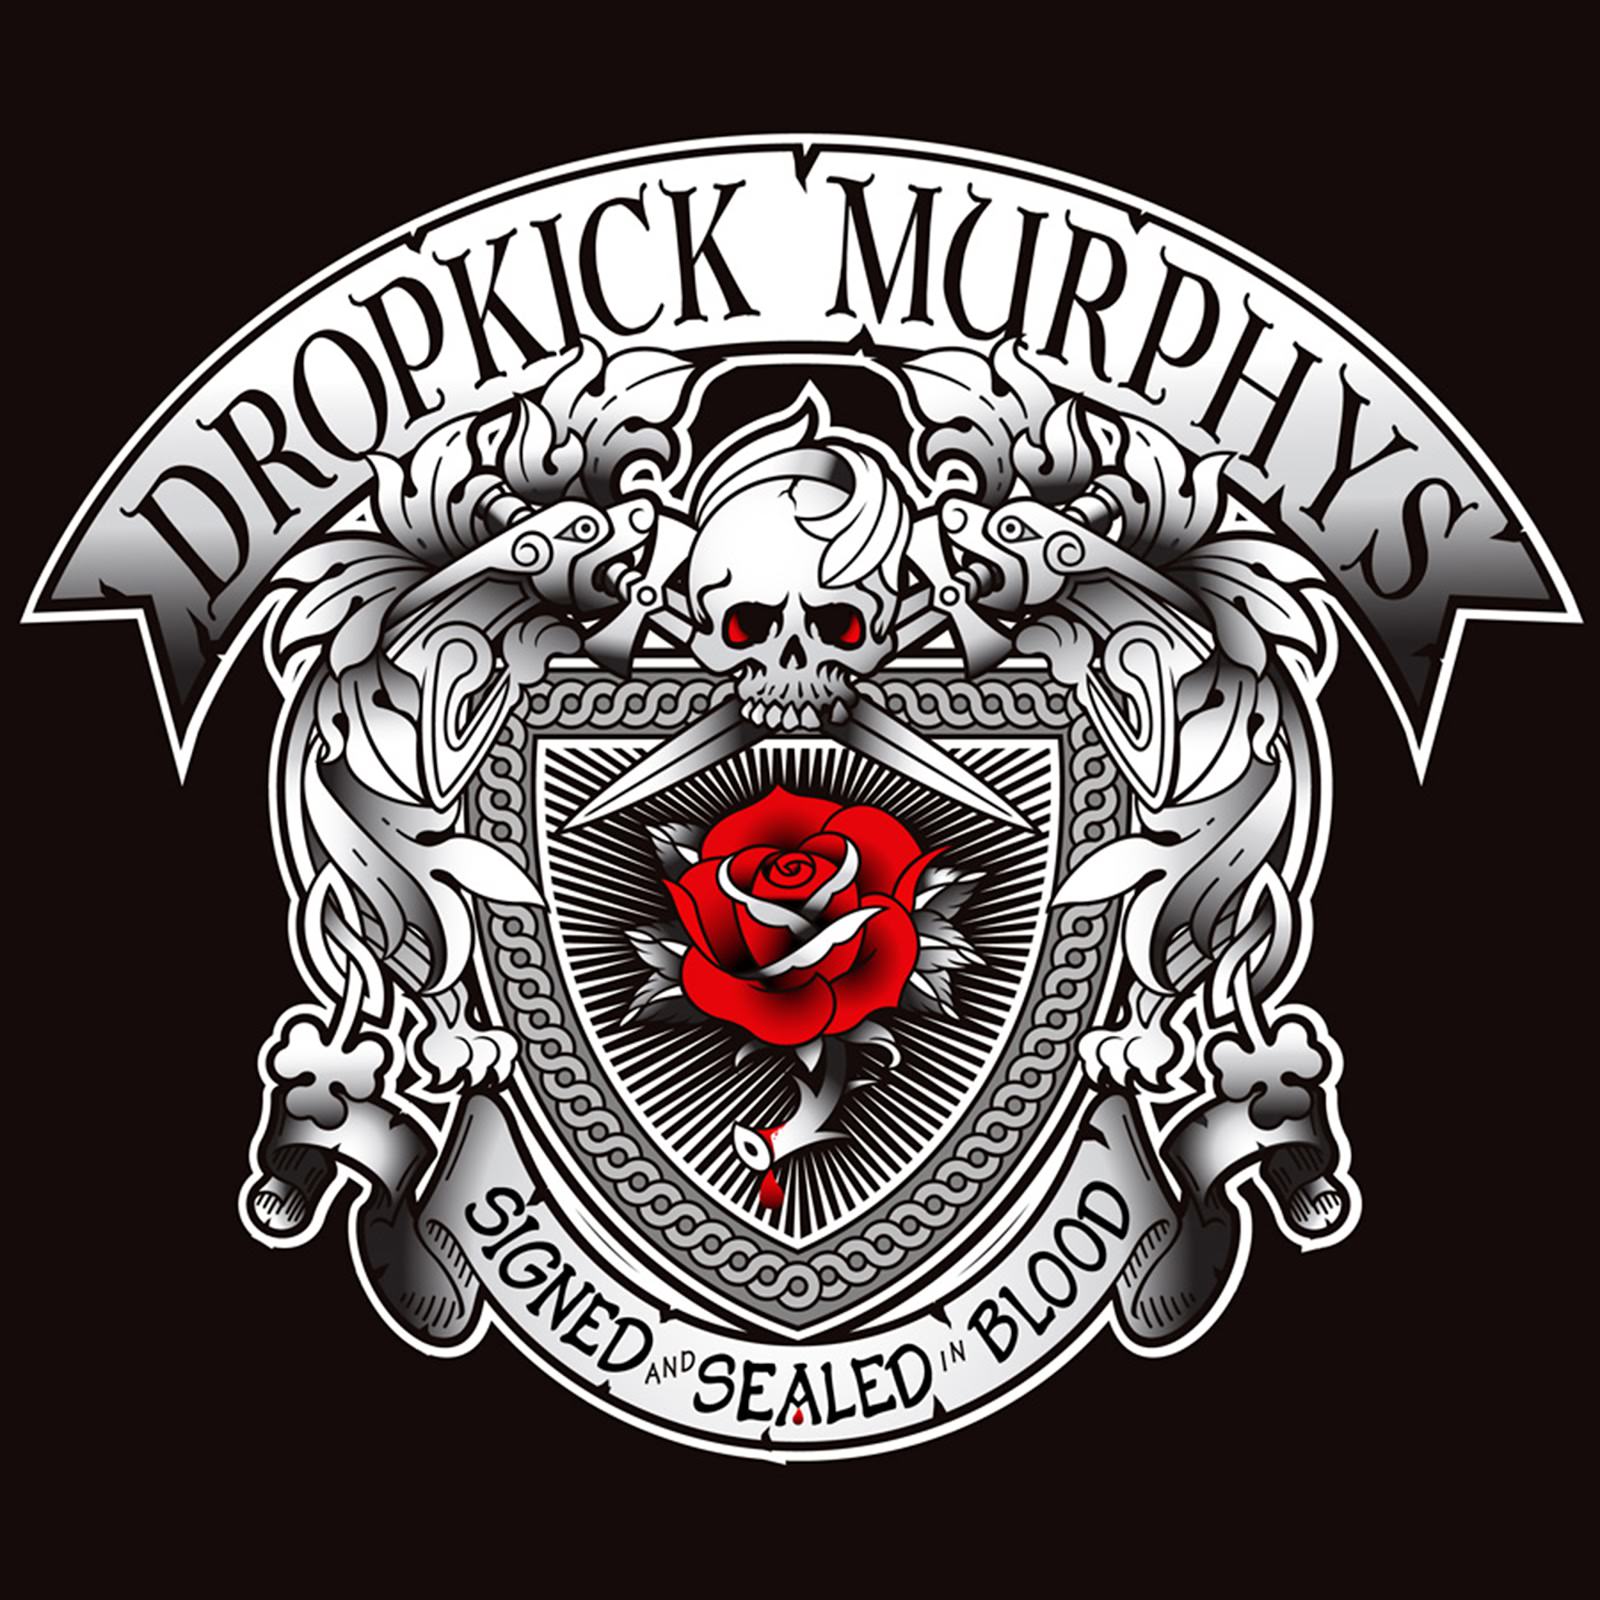 Dropkick Murphys - Signed And Sealed In Blood (2013) [HDTracks FLAC 24bit/88,2kHz]